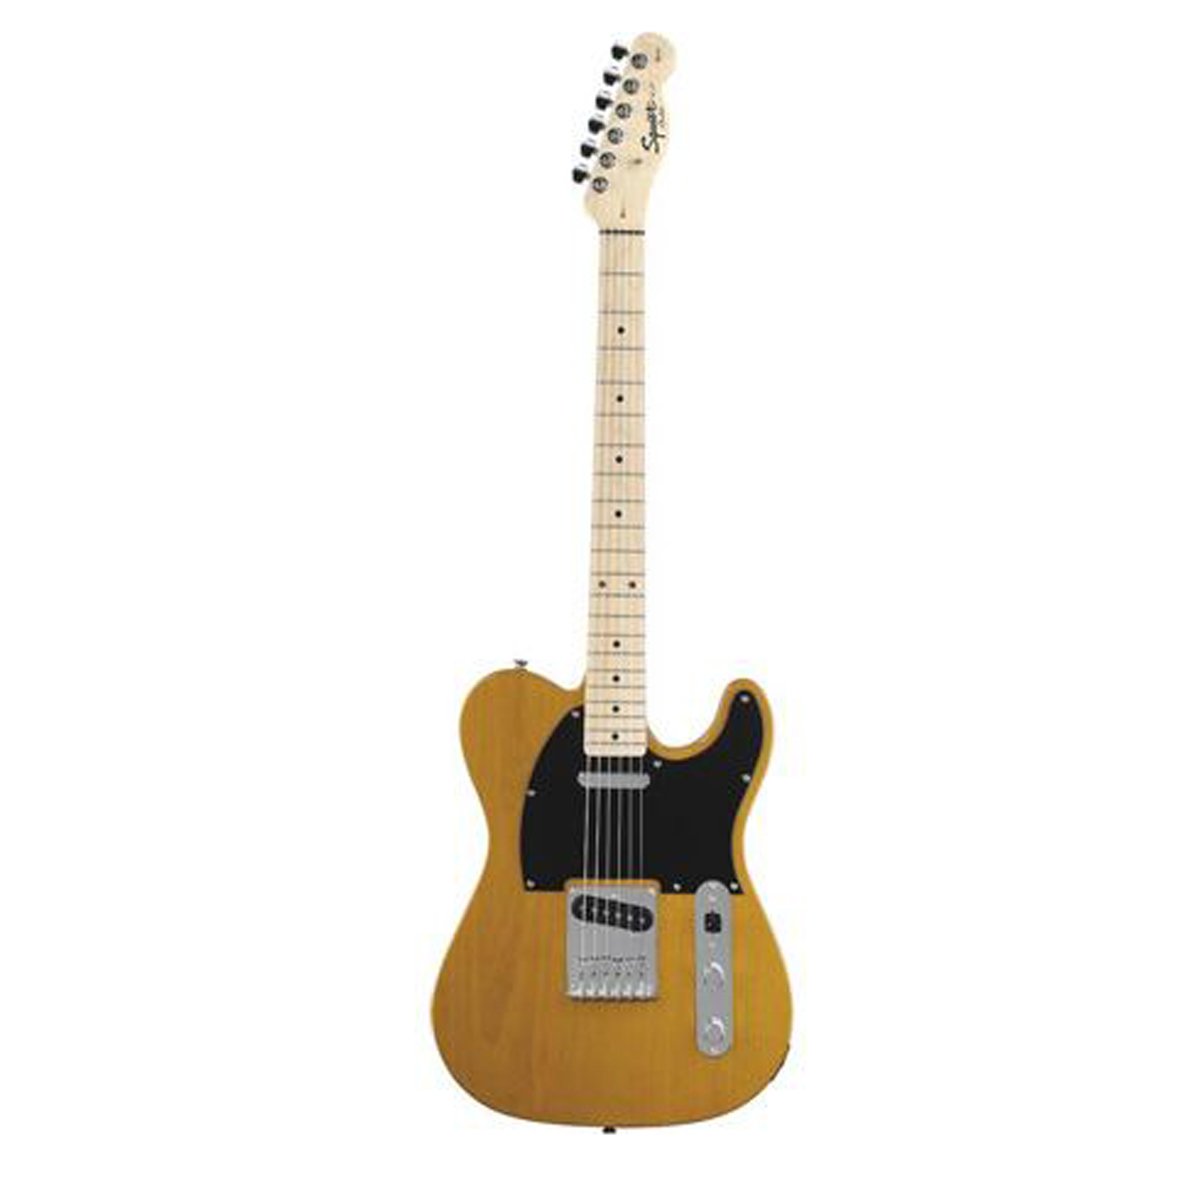 Squier - Telecaster Butterscotch Blonde affinity